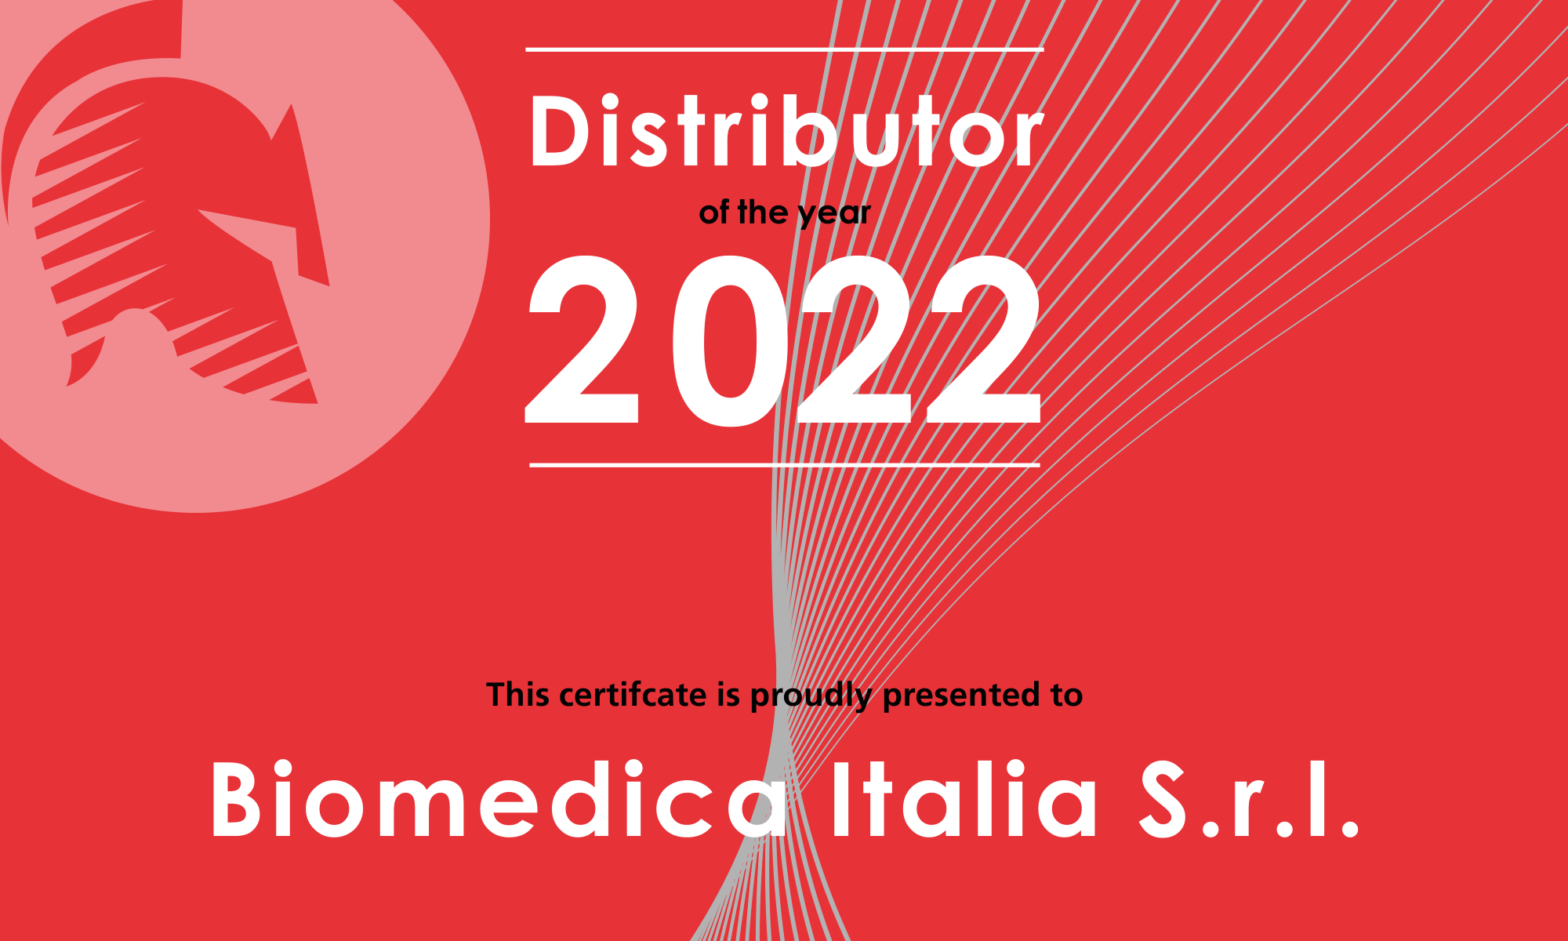 Distributor of the Year 2022